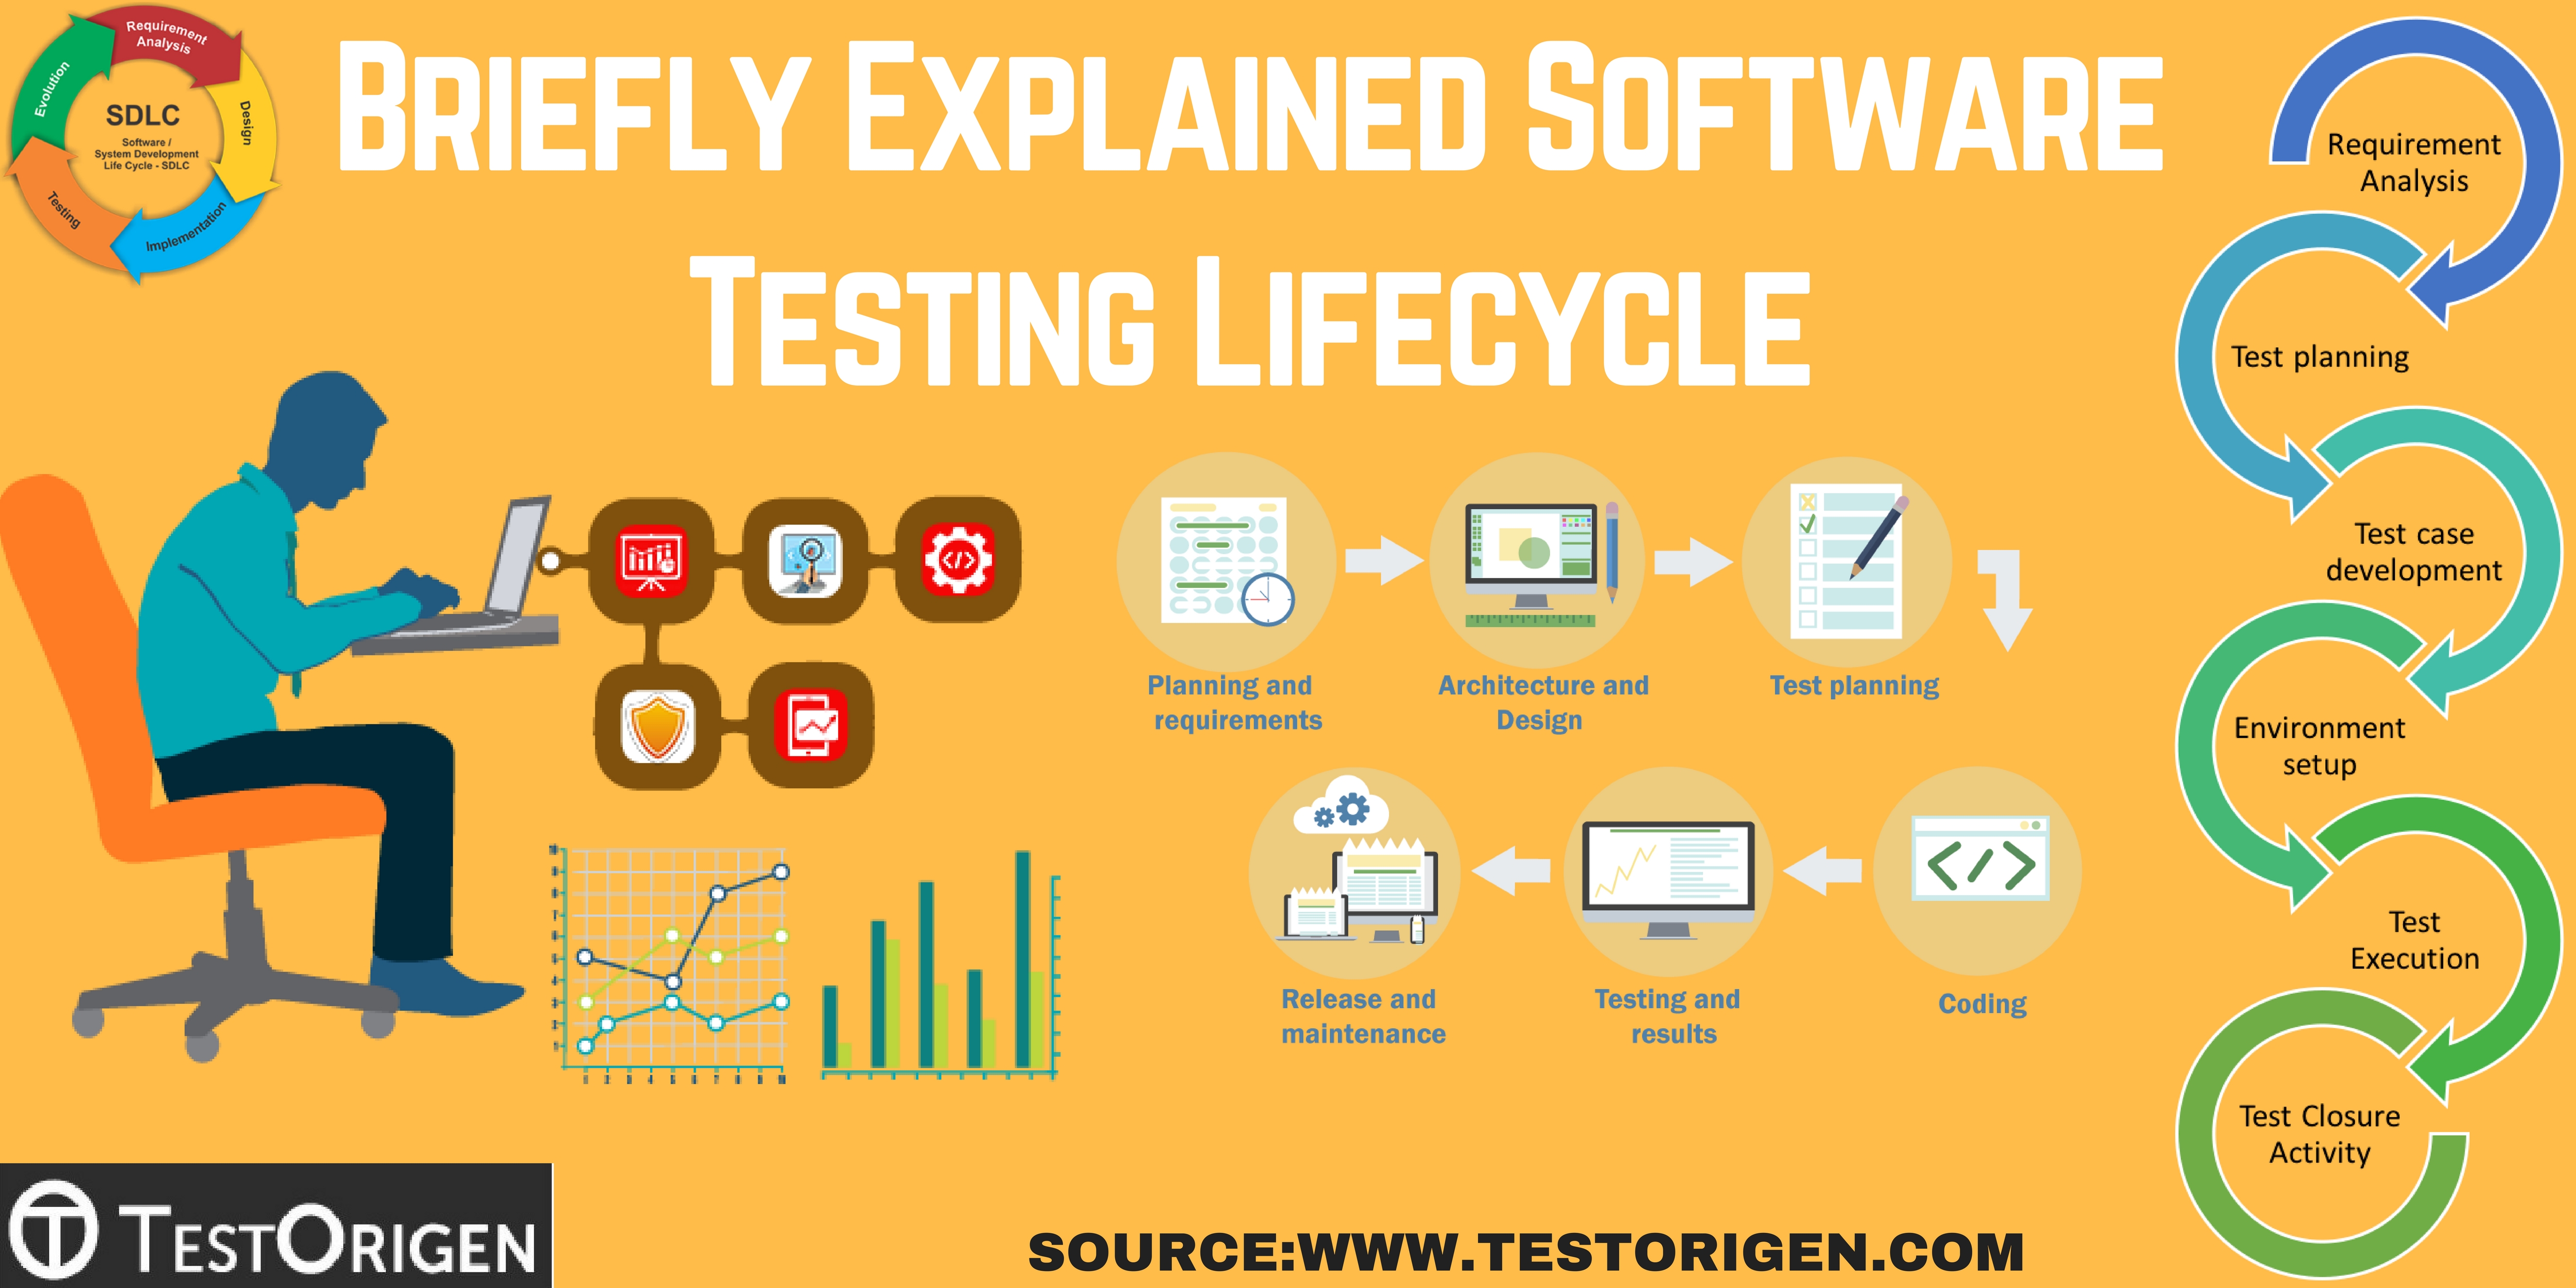 Briefly Explained Software Testing Lifecycle. software testing life cycle models